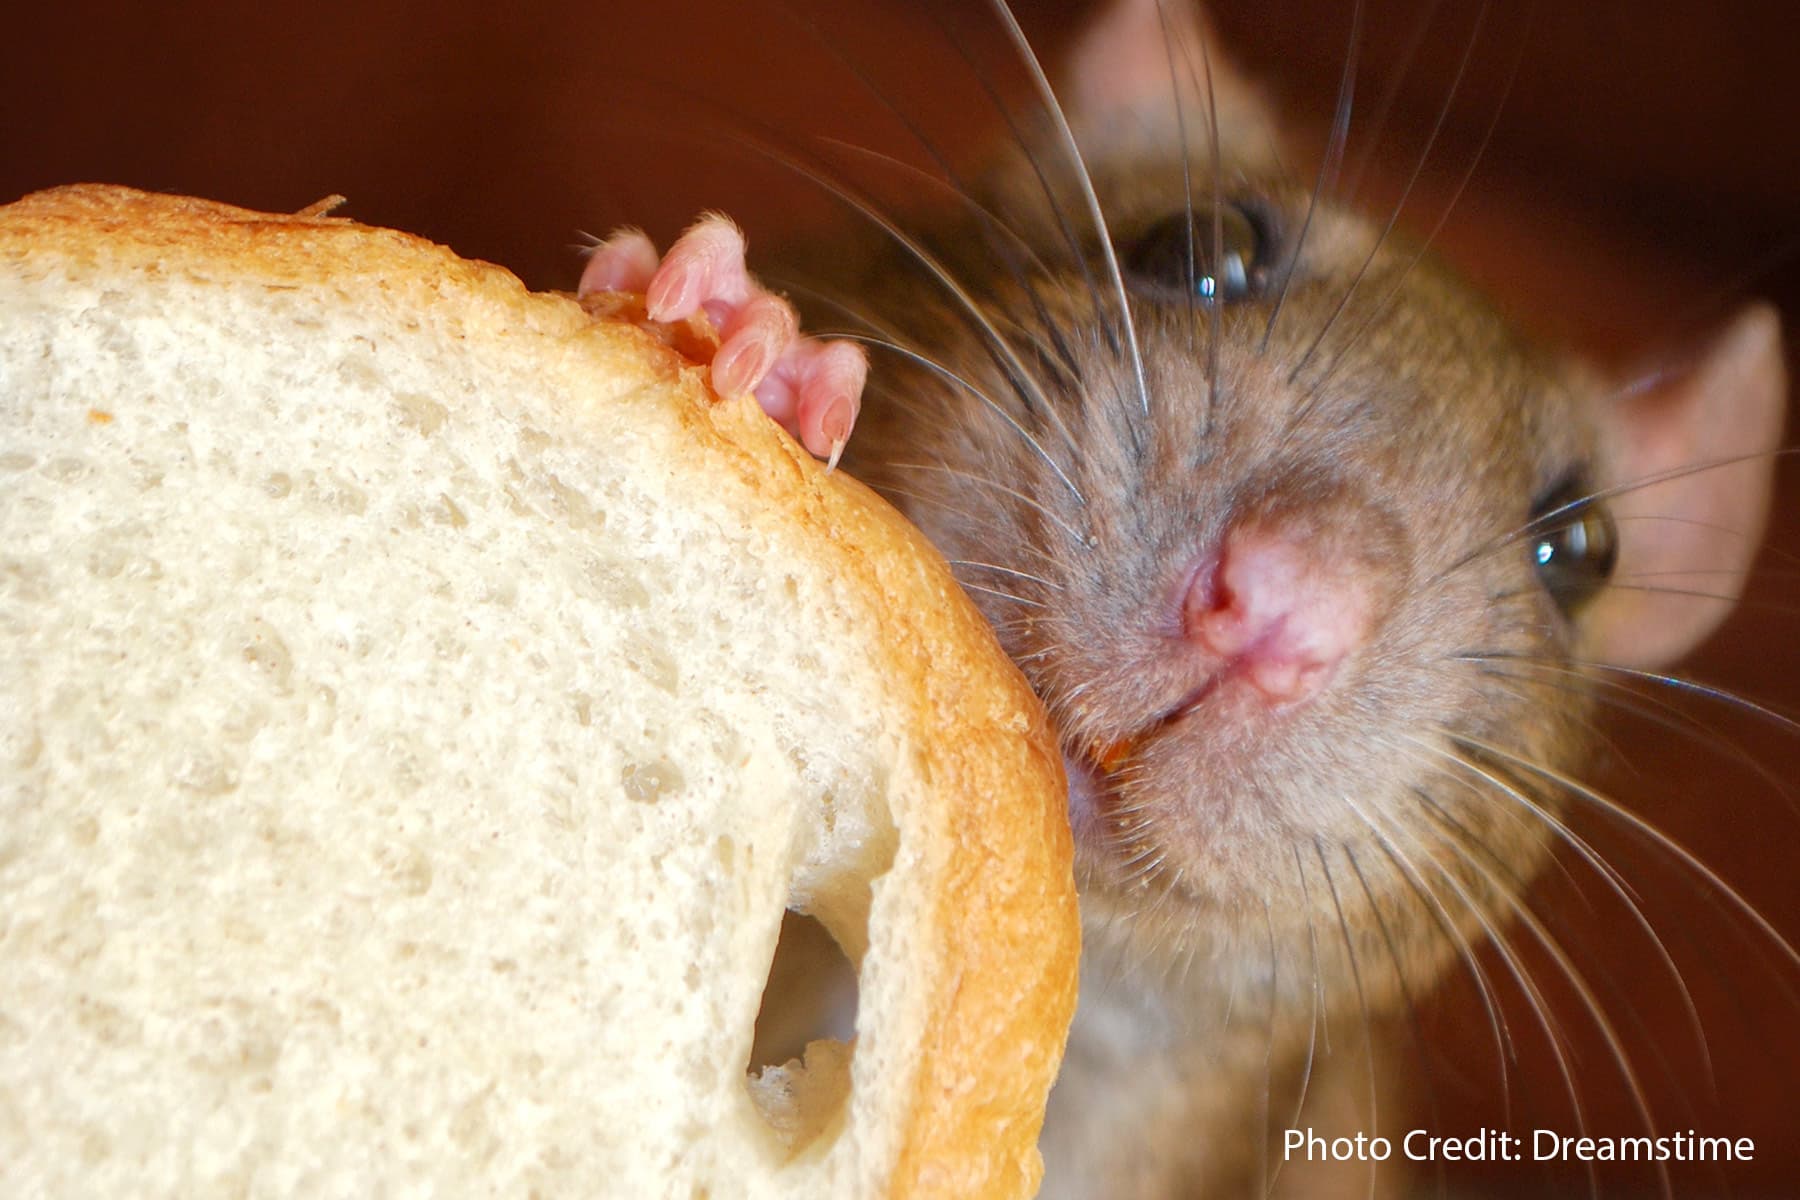 Rats Blamed for Spreading Disease More Than They Do